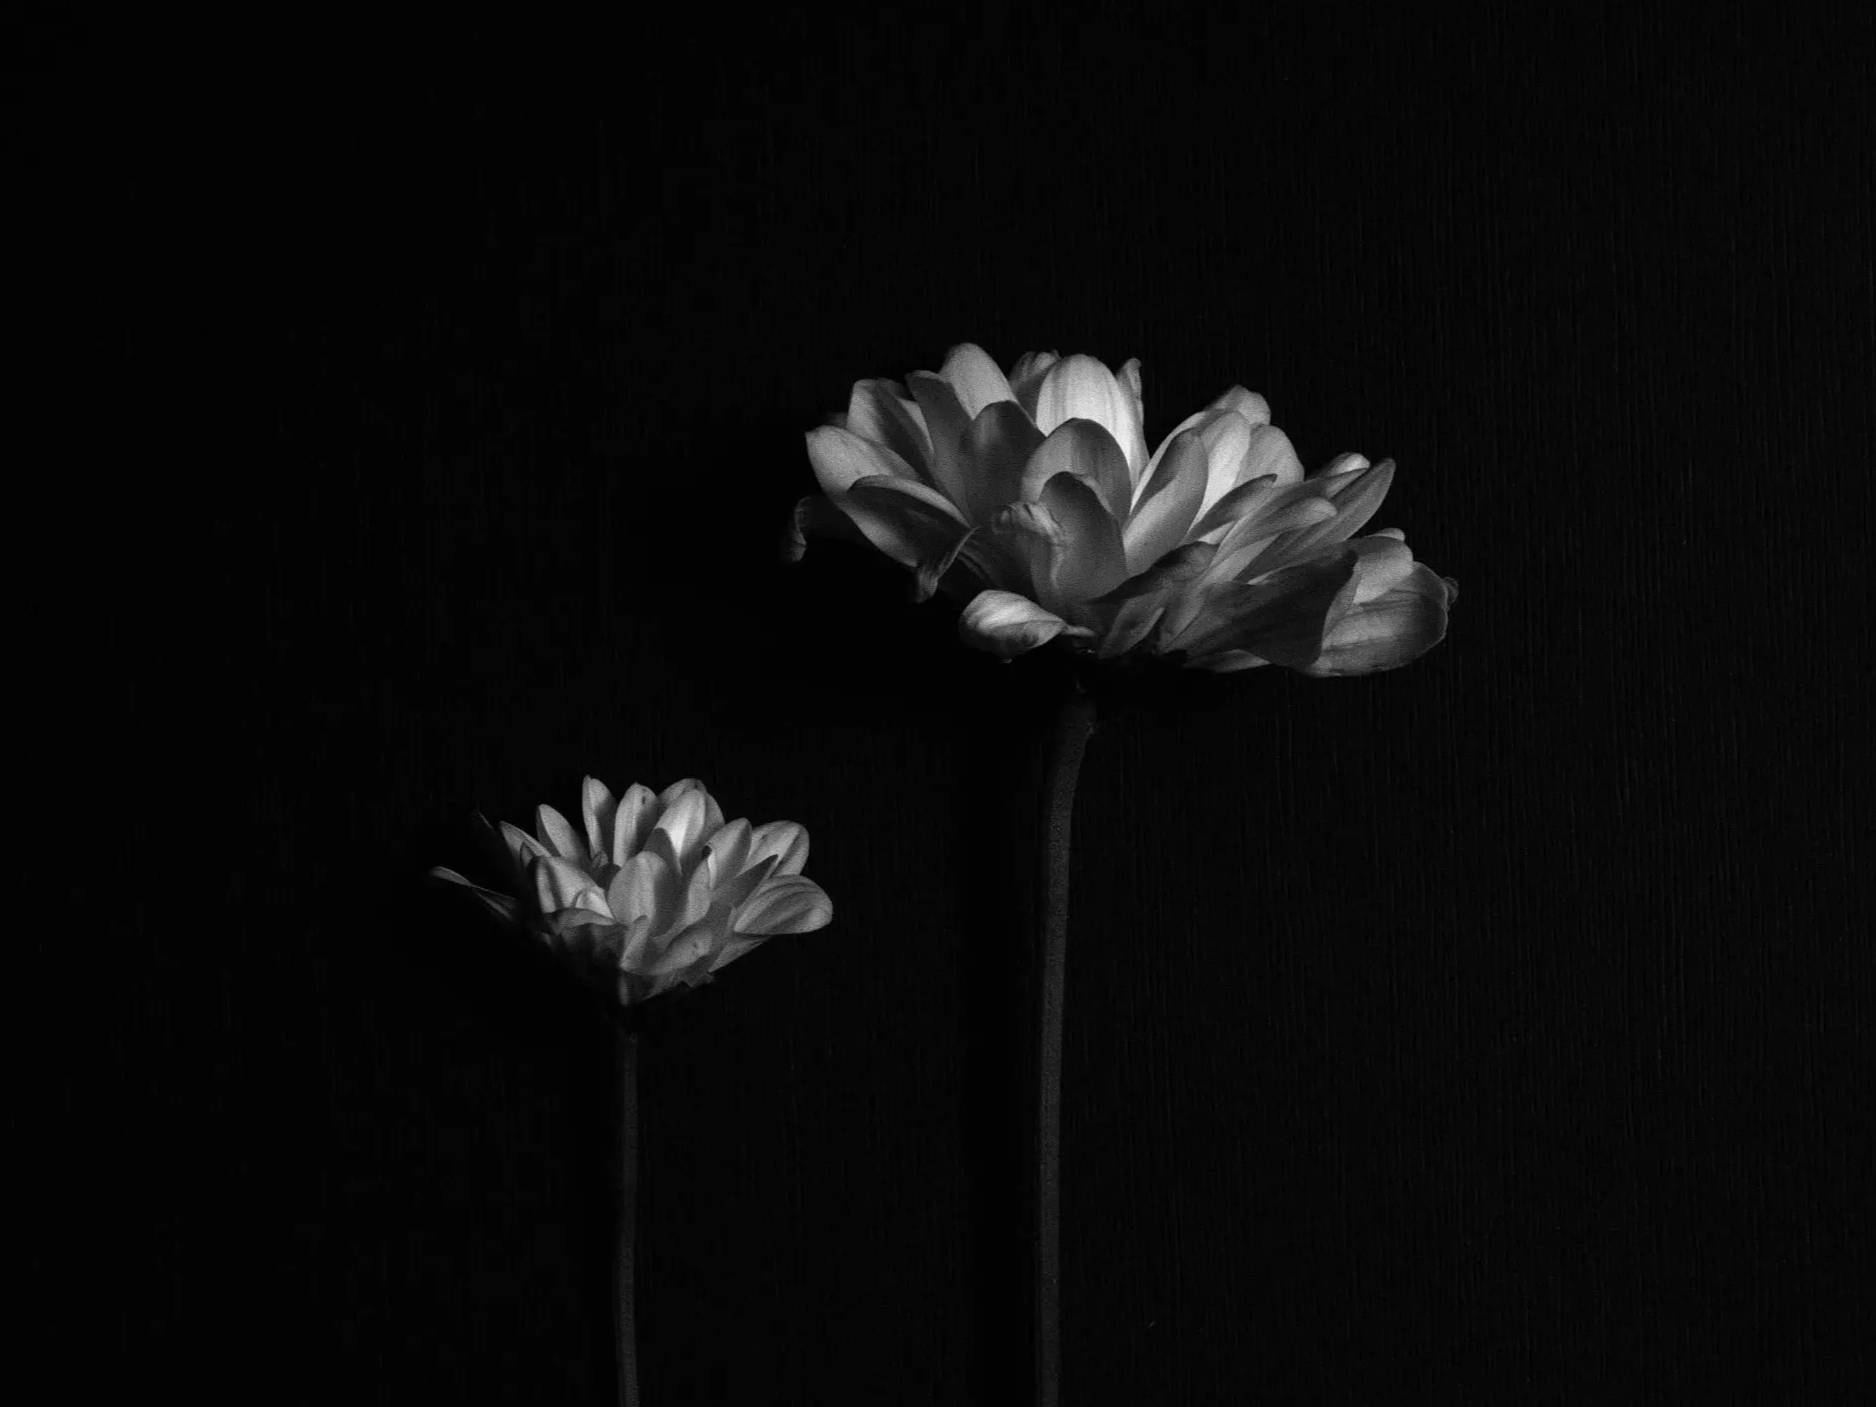 White flowers against a black background